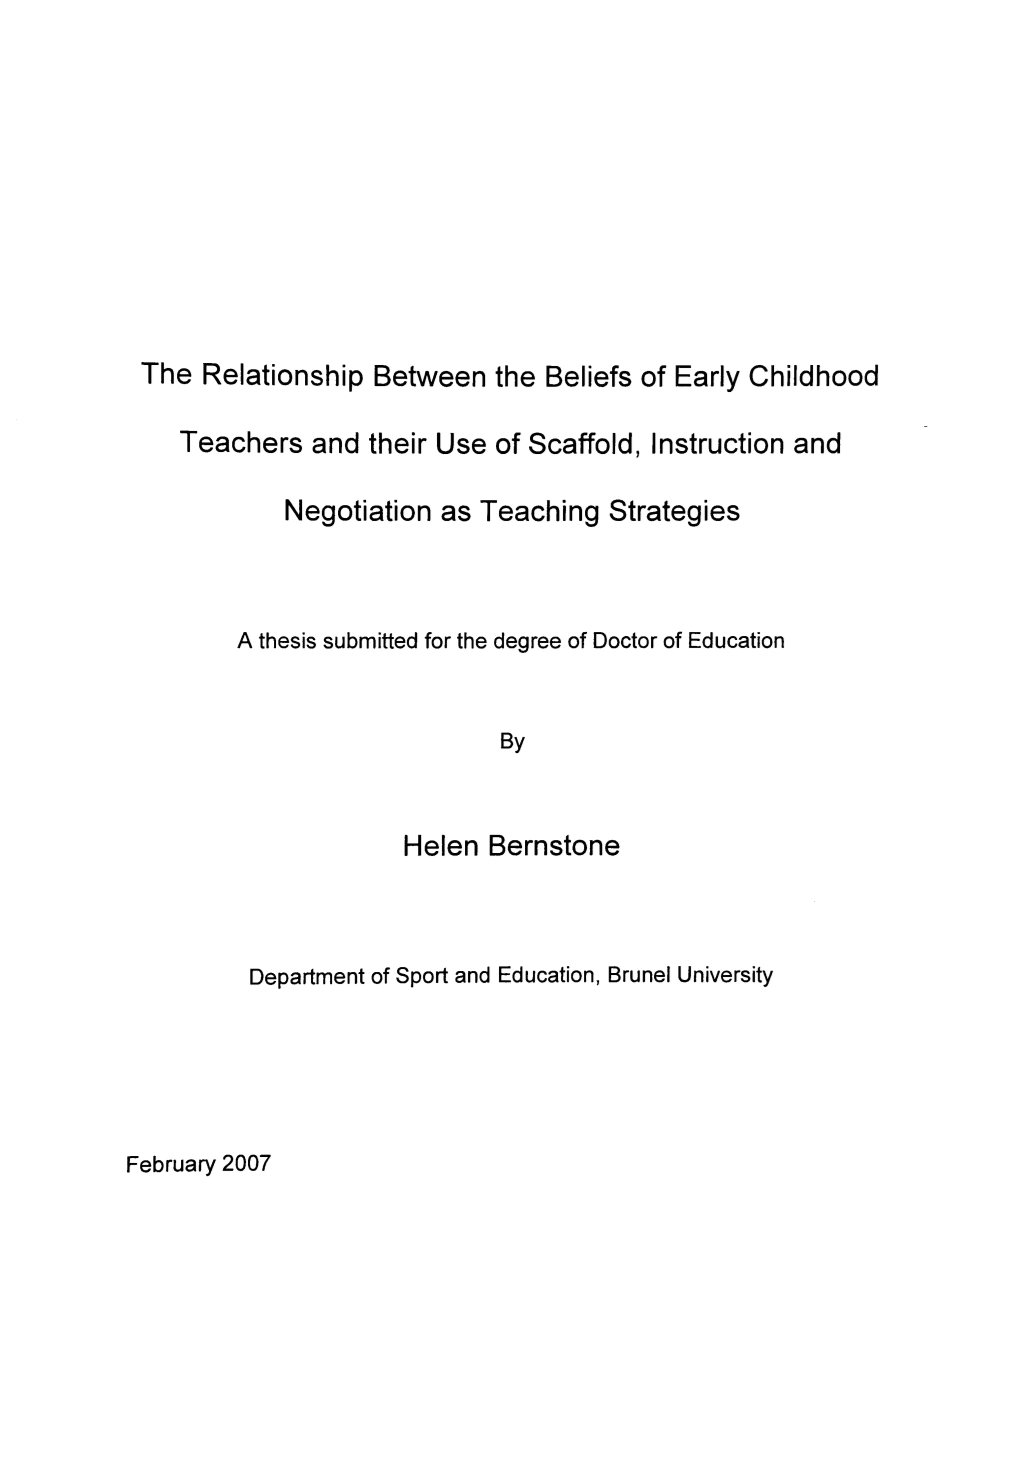 The Relationship Between the Beliefs of Early Childhood Teachers And